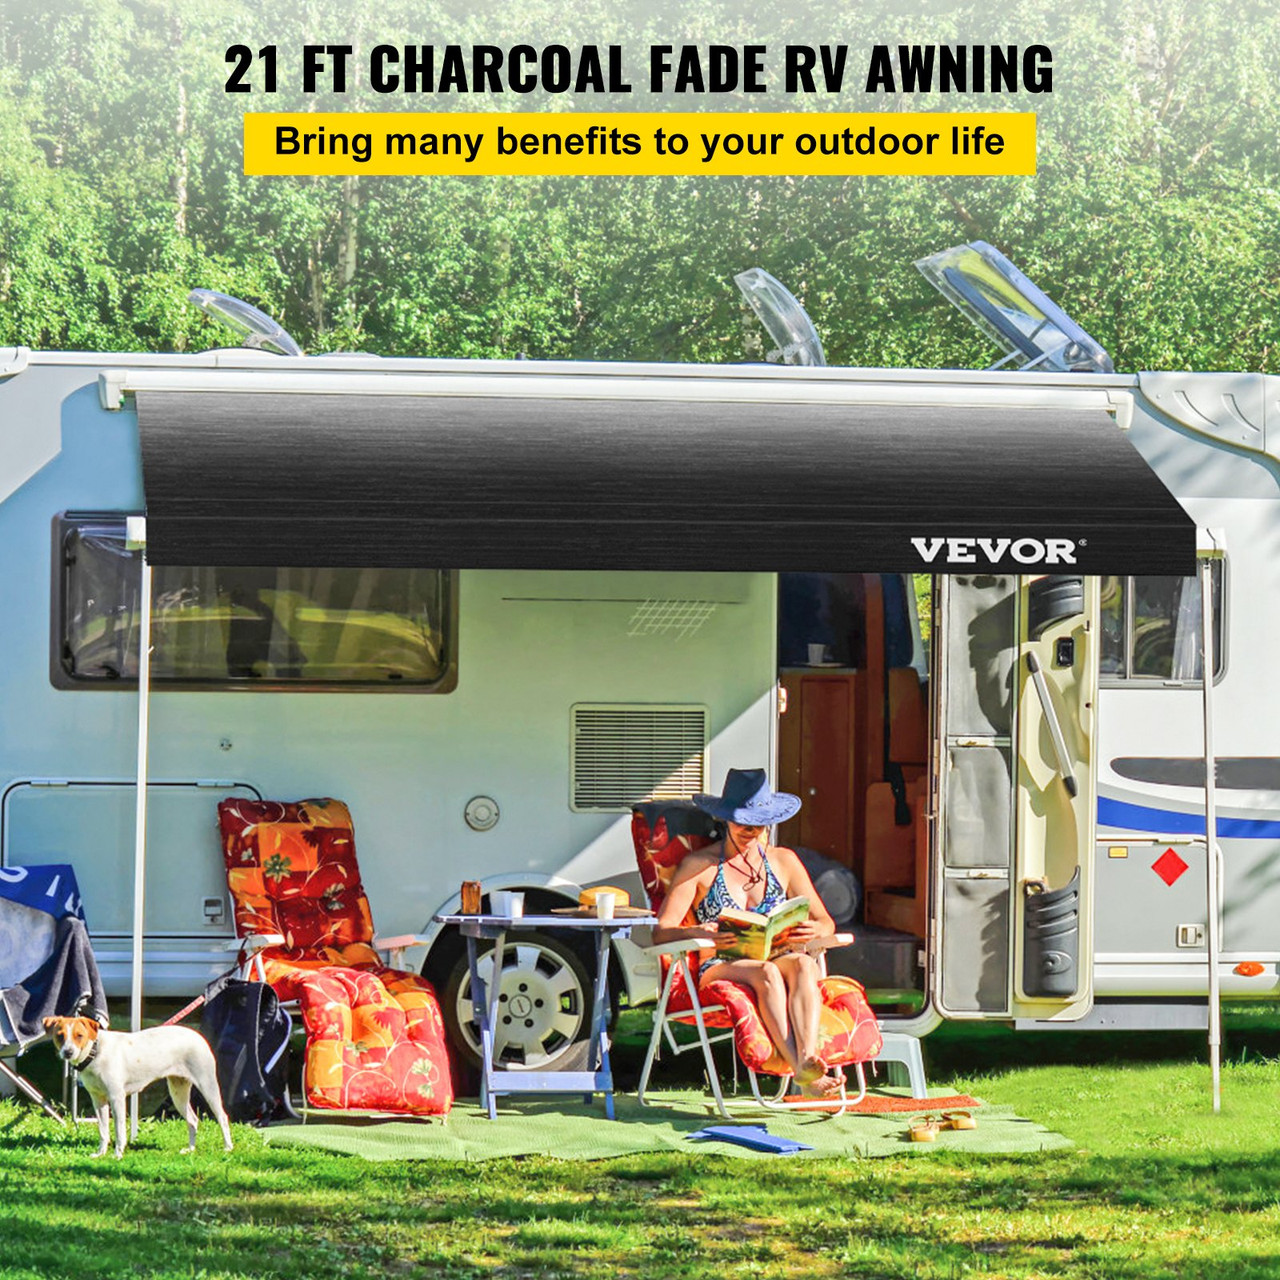 RV Awning 21 ft, Awning Replacement Fabric 20 ft 2 in, Charcoal Fade RV Awning Replacement, 15oz Vinyl Material Replacement Awning, Sun Shade and Waterproof Camper Awning Replacement Fabric